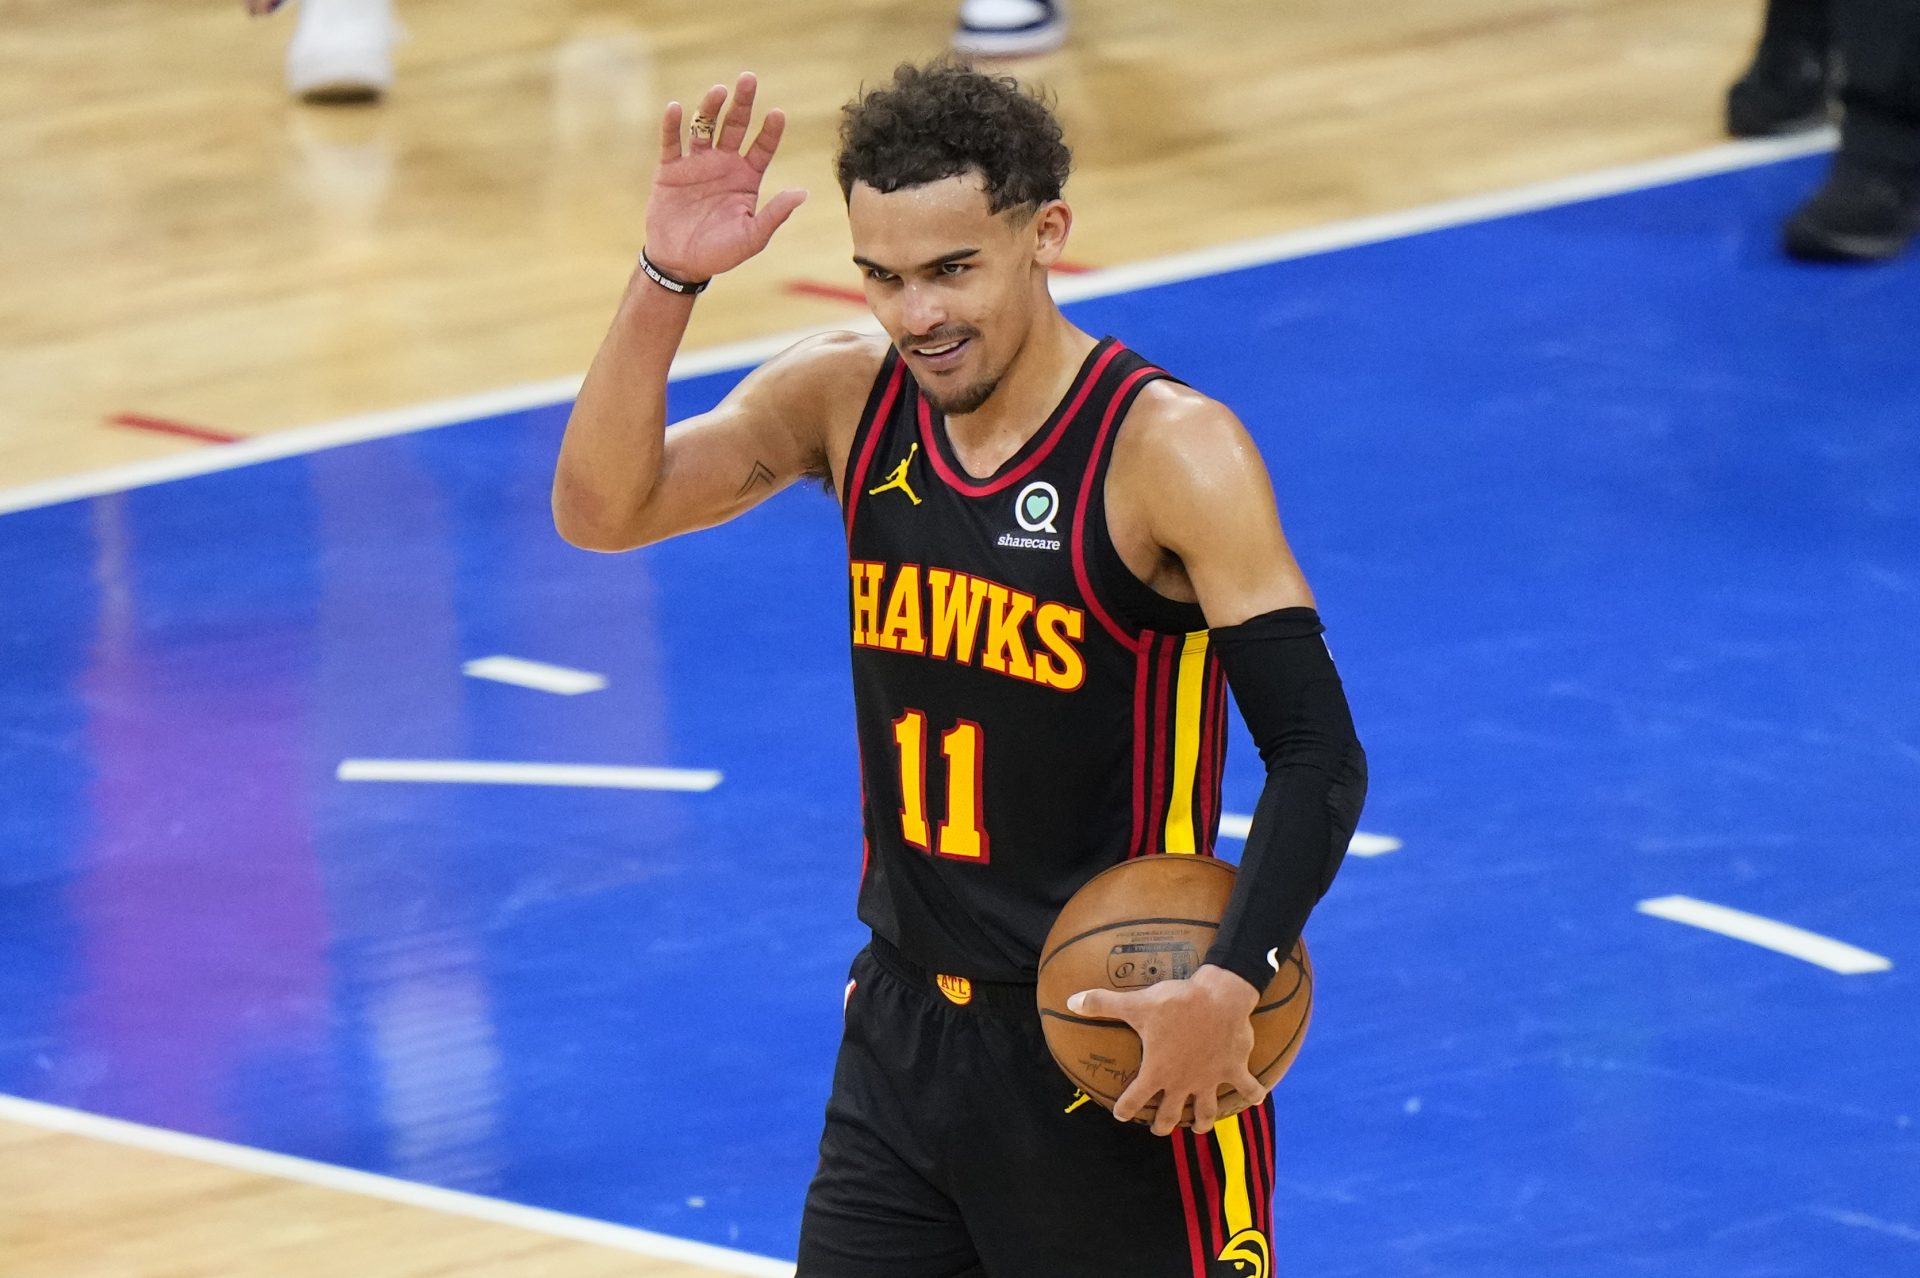 Hawks Troll 76ers After Playoff Series With ‘Recent Prince’ Video on Twitter